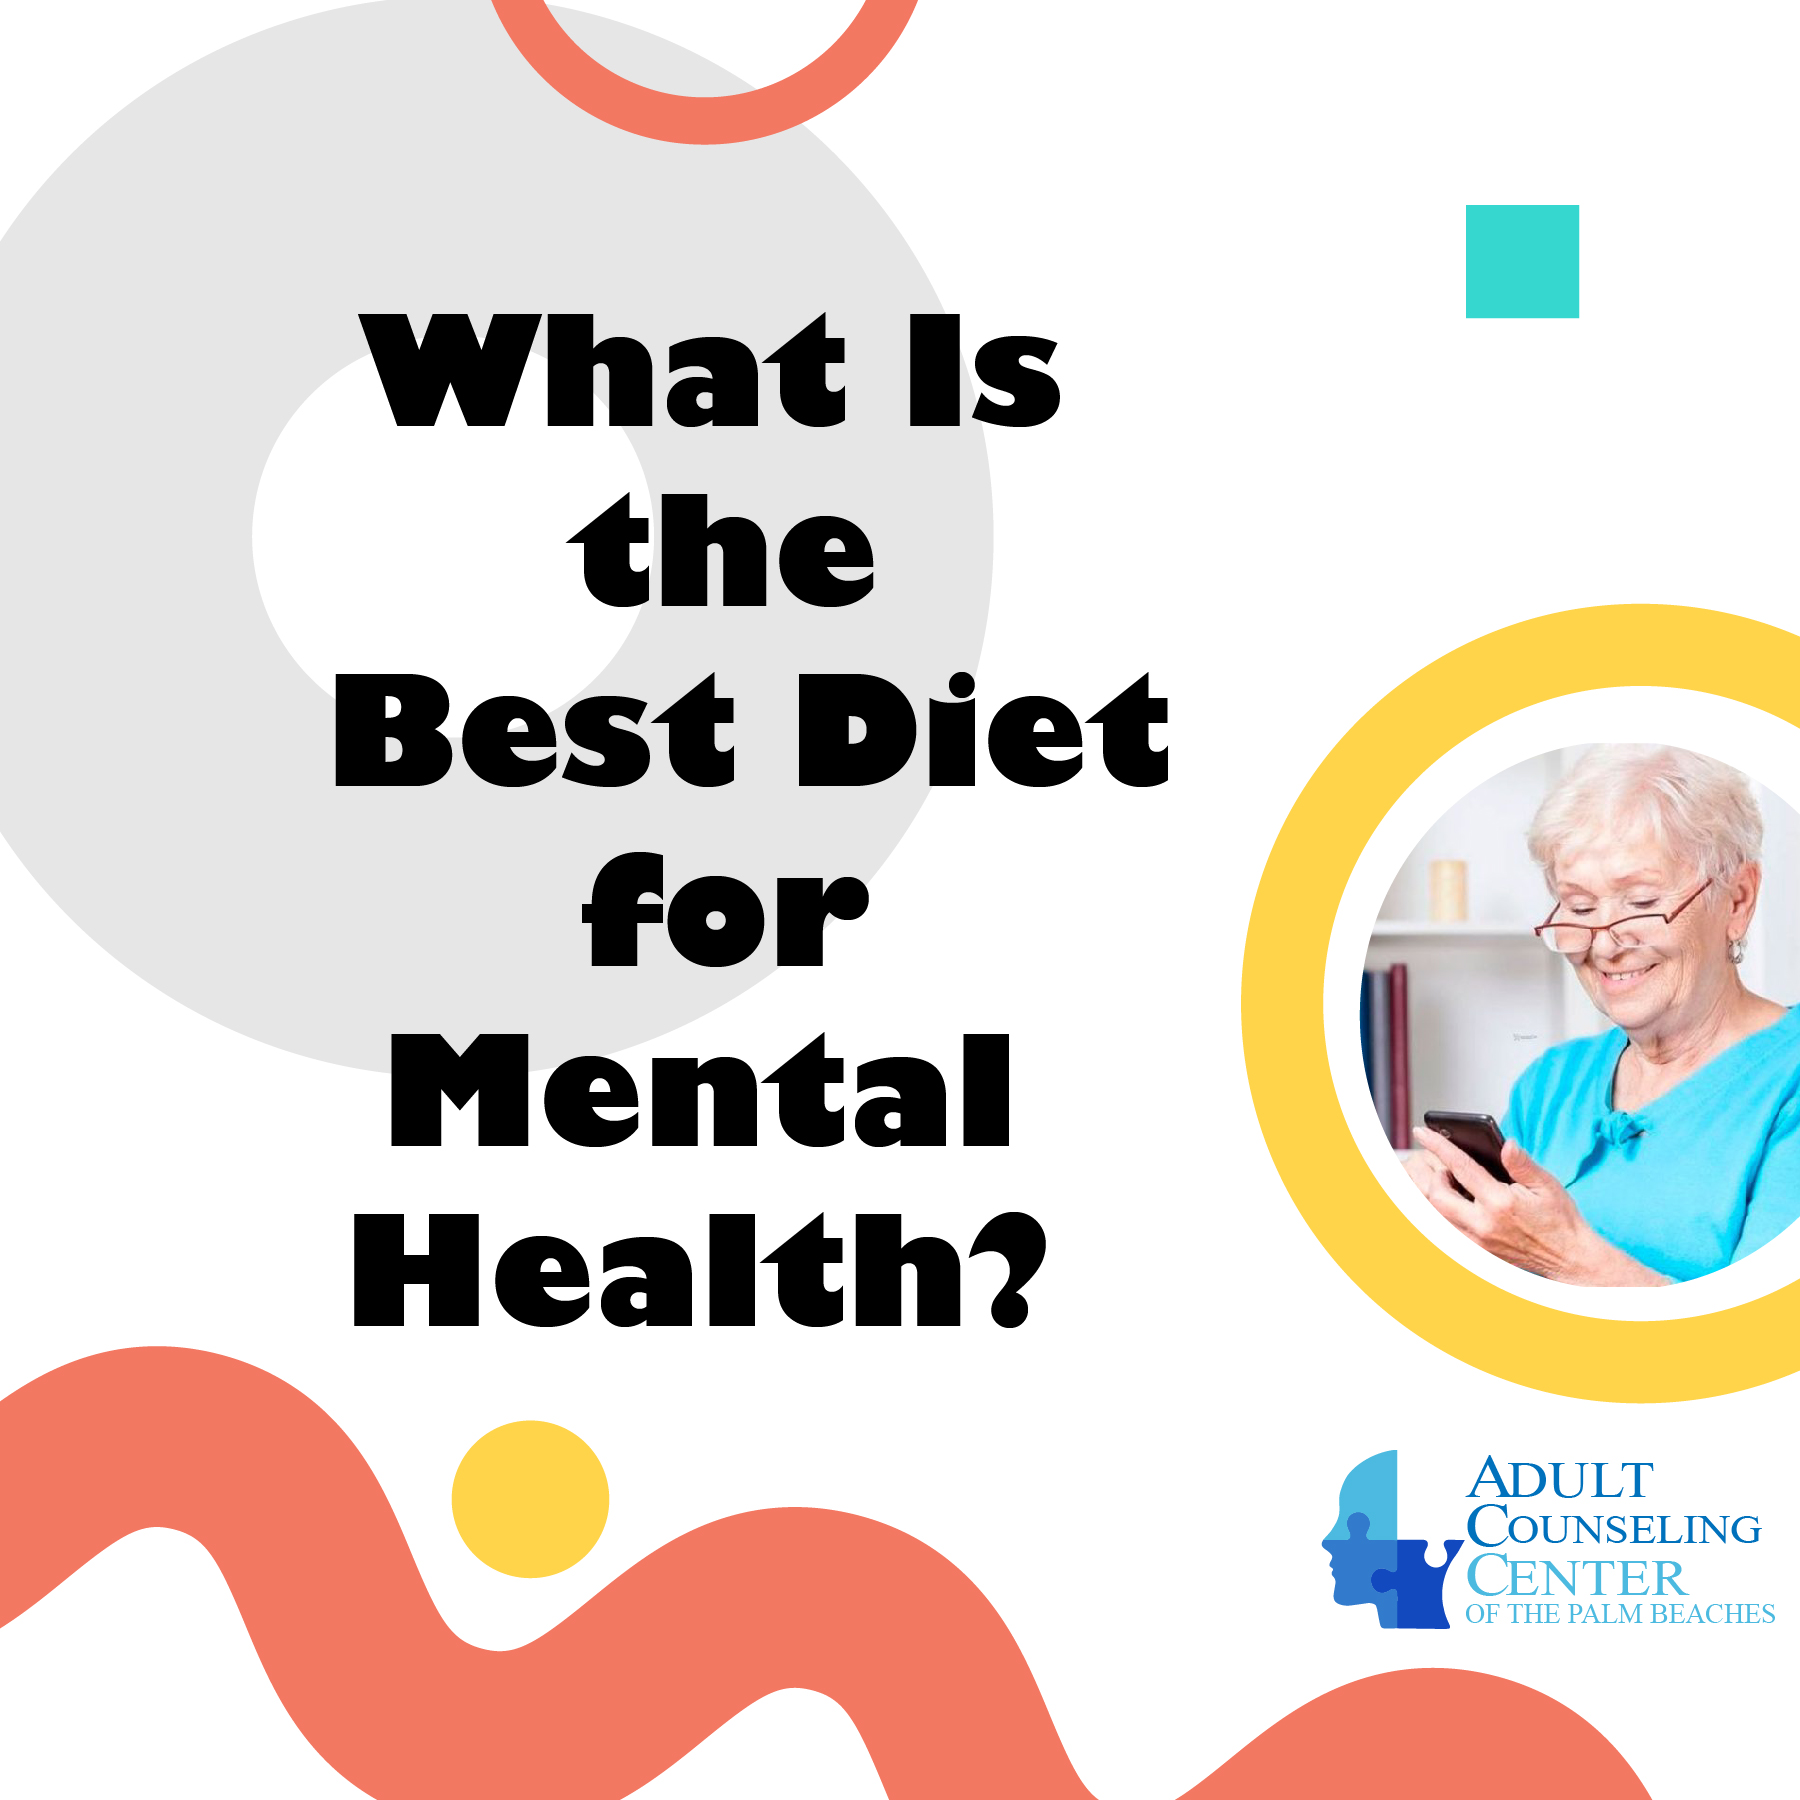 What Is the Best Diet for Mental Health?